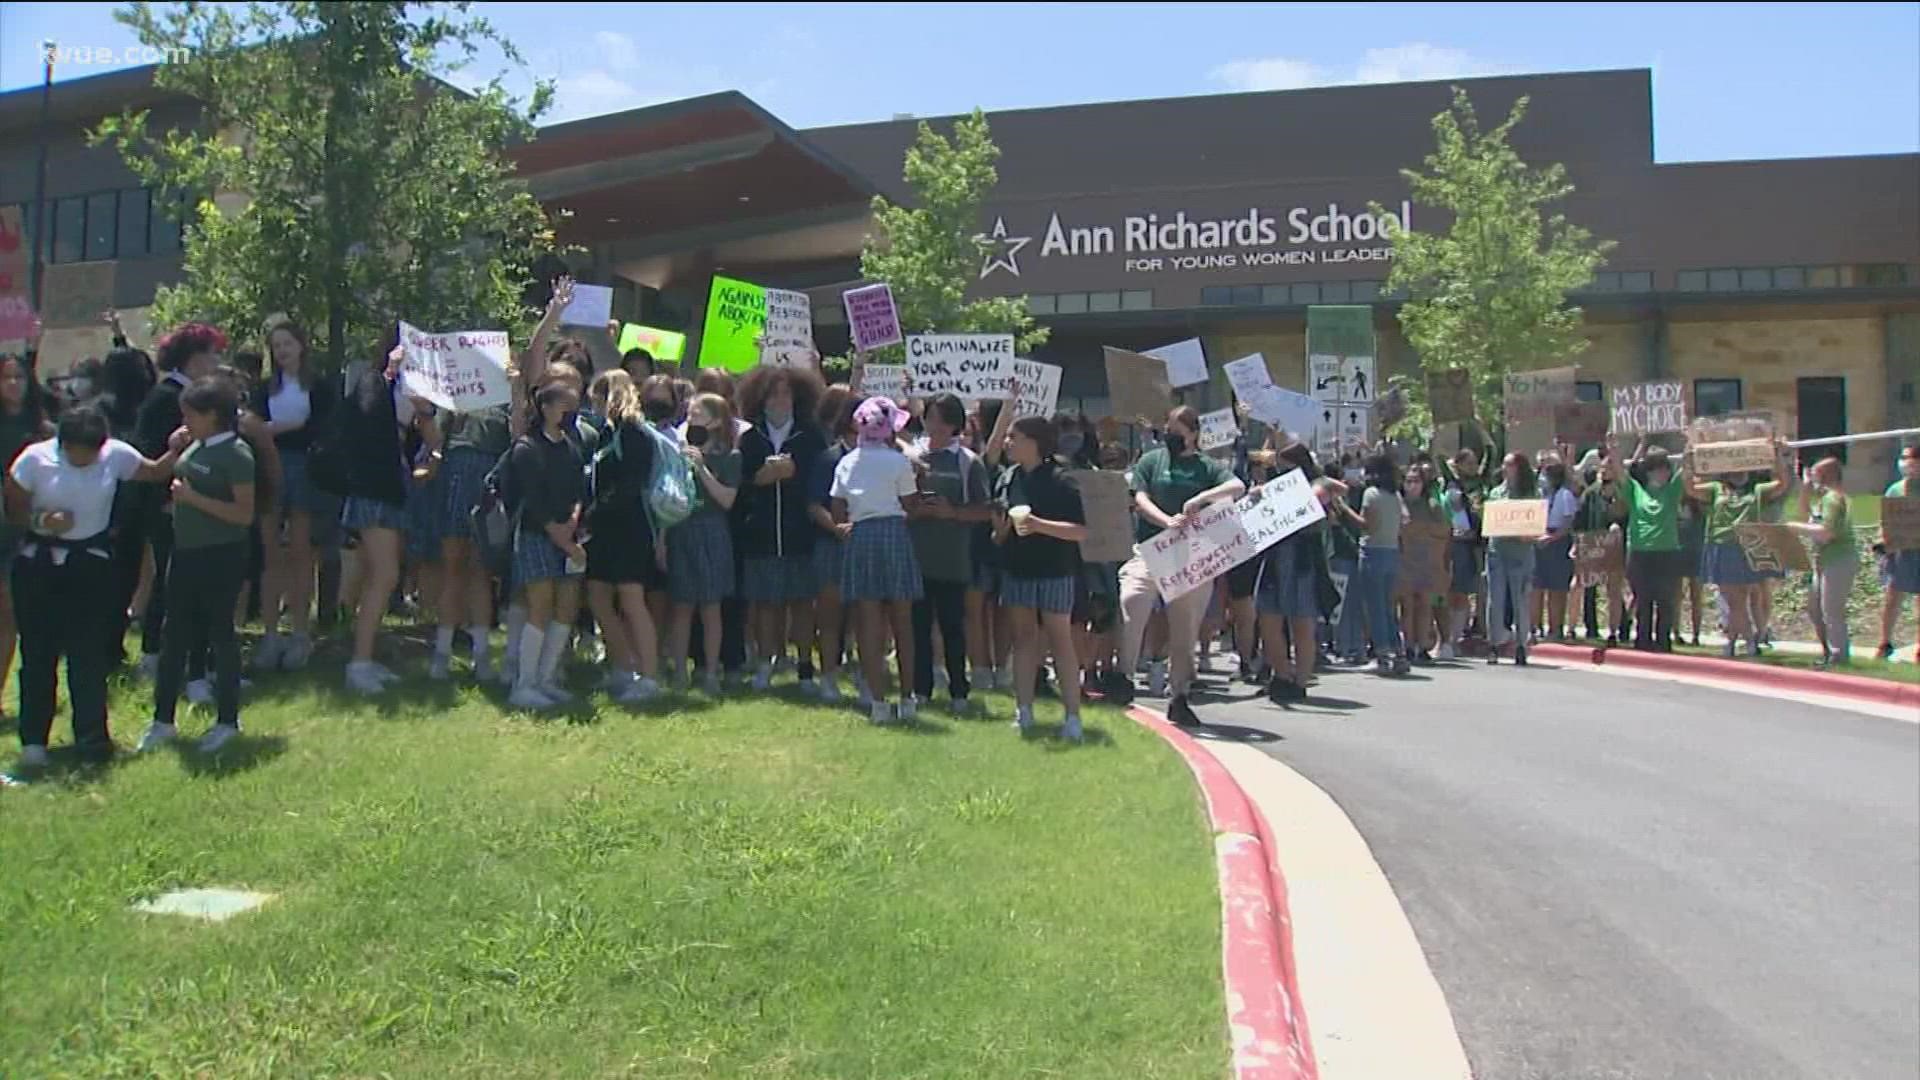 This comes days after students at Round Rock High School walked out of class last week.